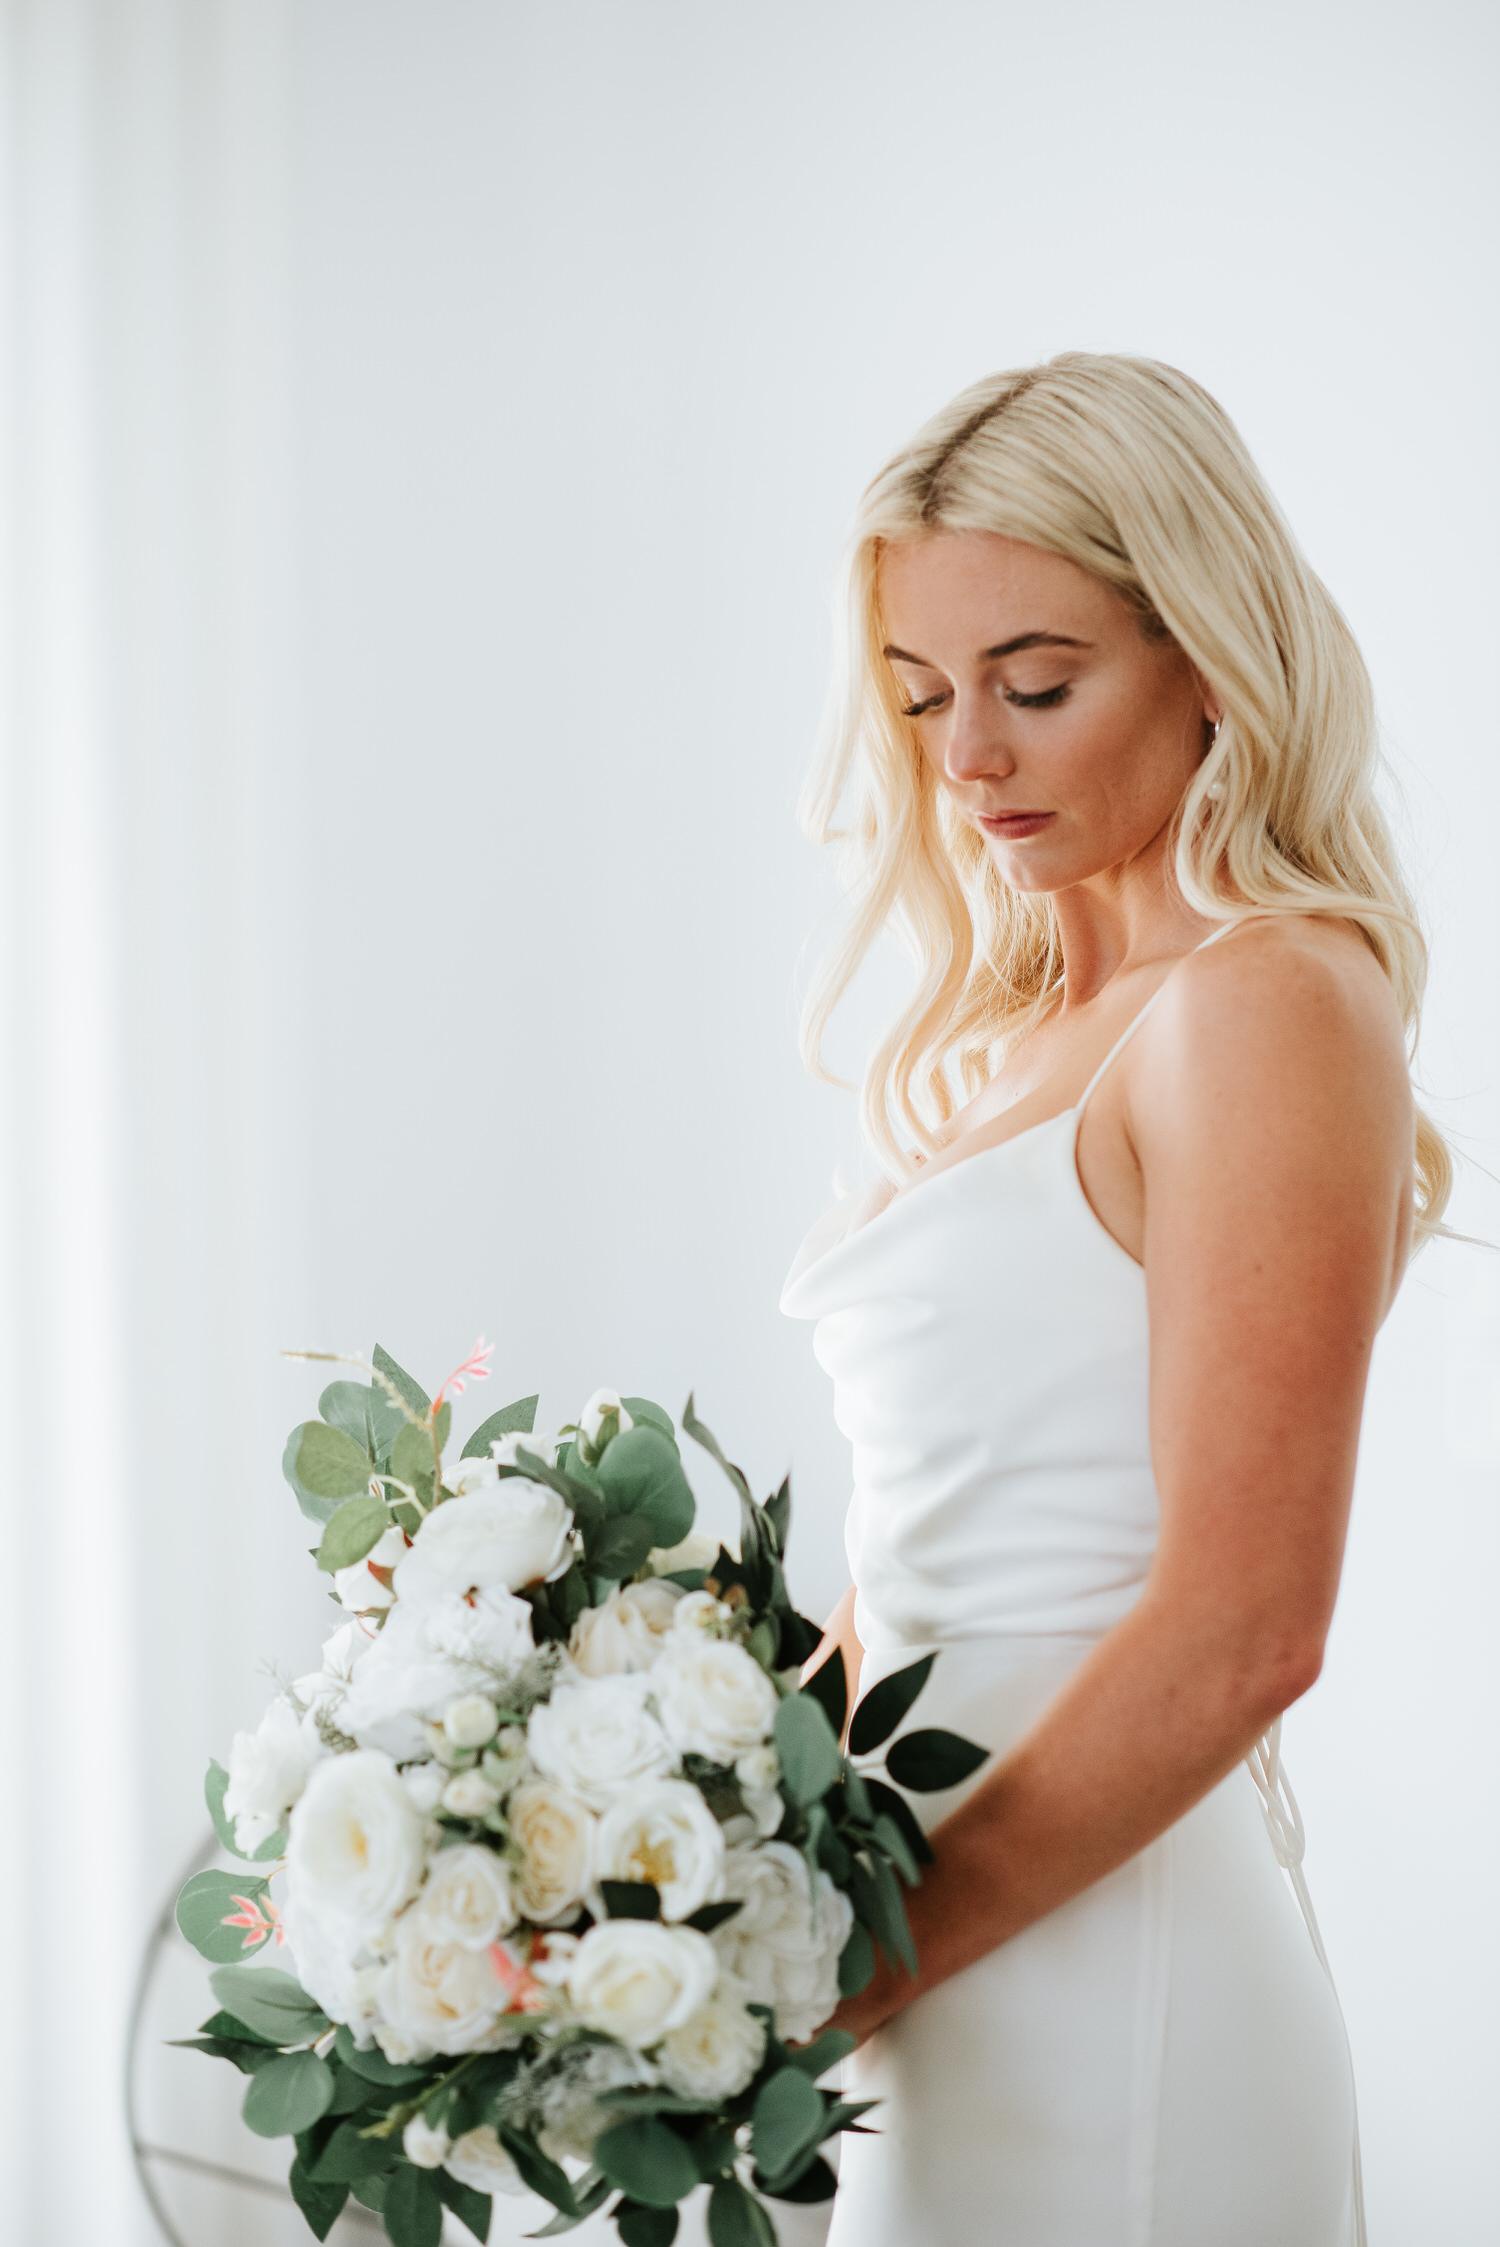 Mykonos wedding photographer: stunning close up of bride looking down at the bouquet she is holding.